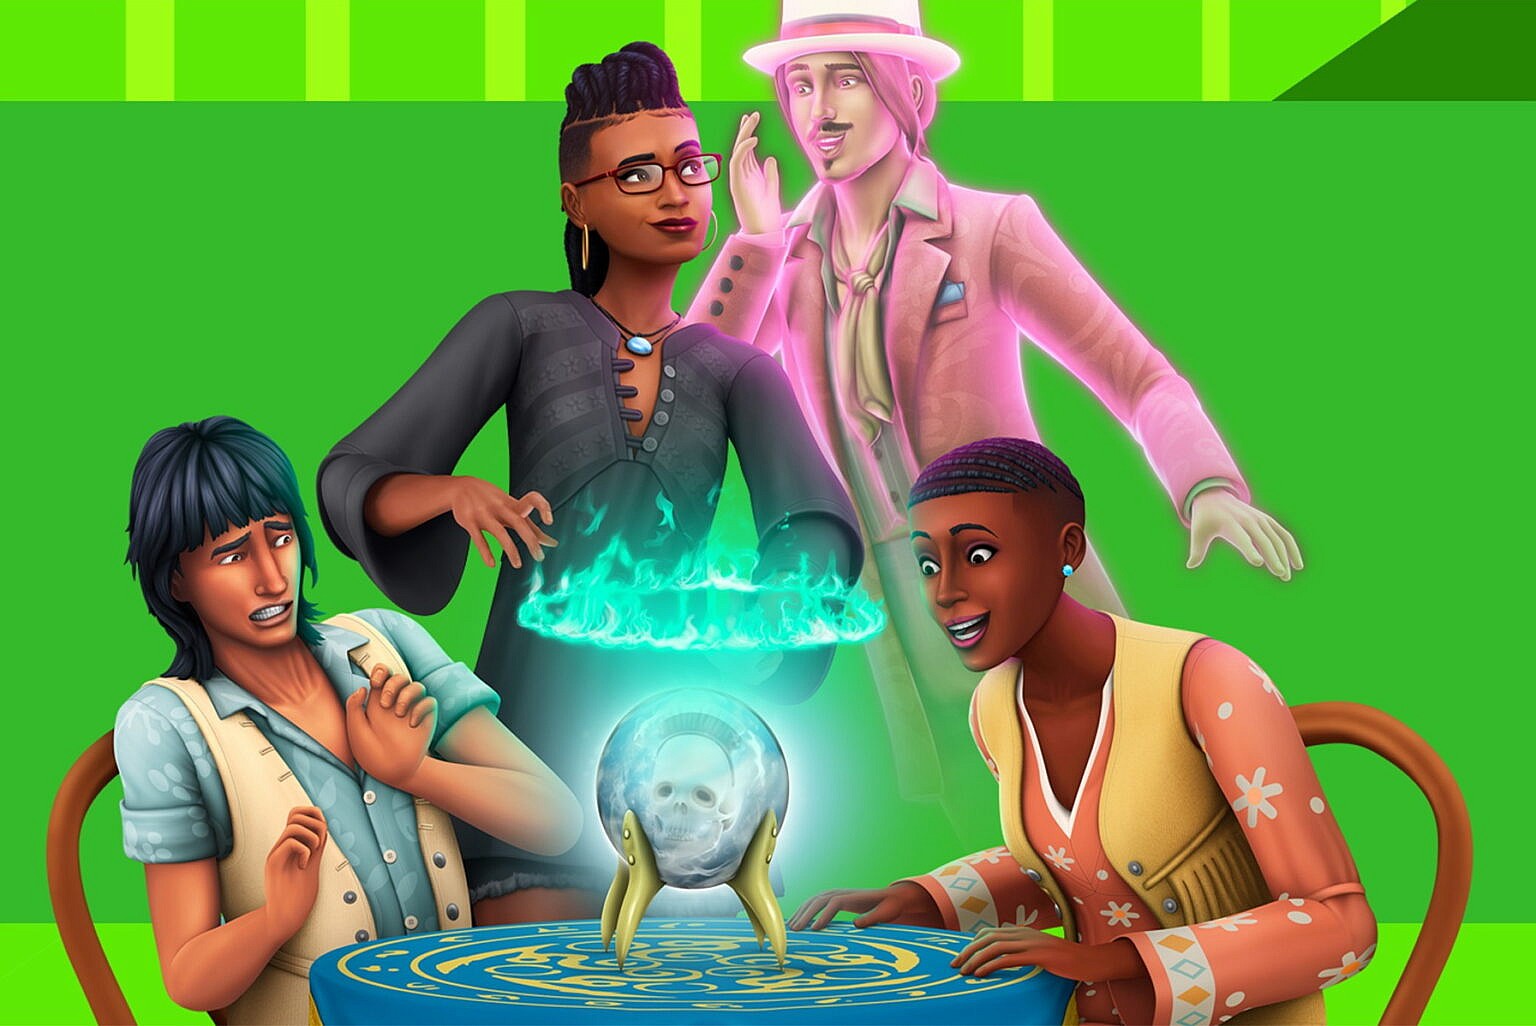 list of all sims 4 expansions